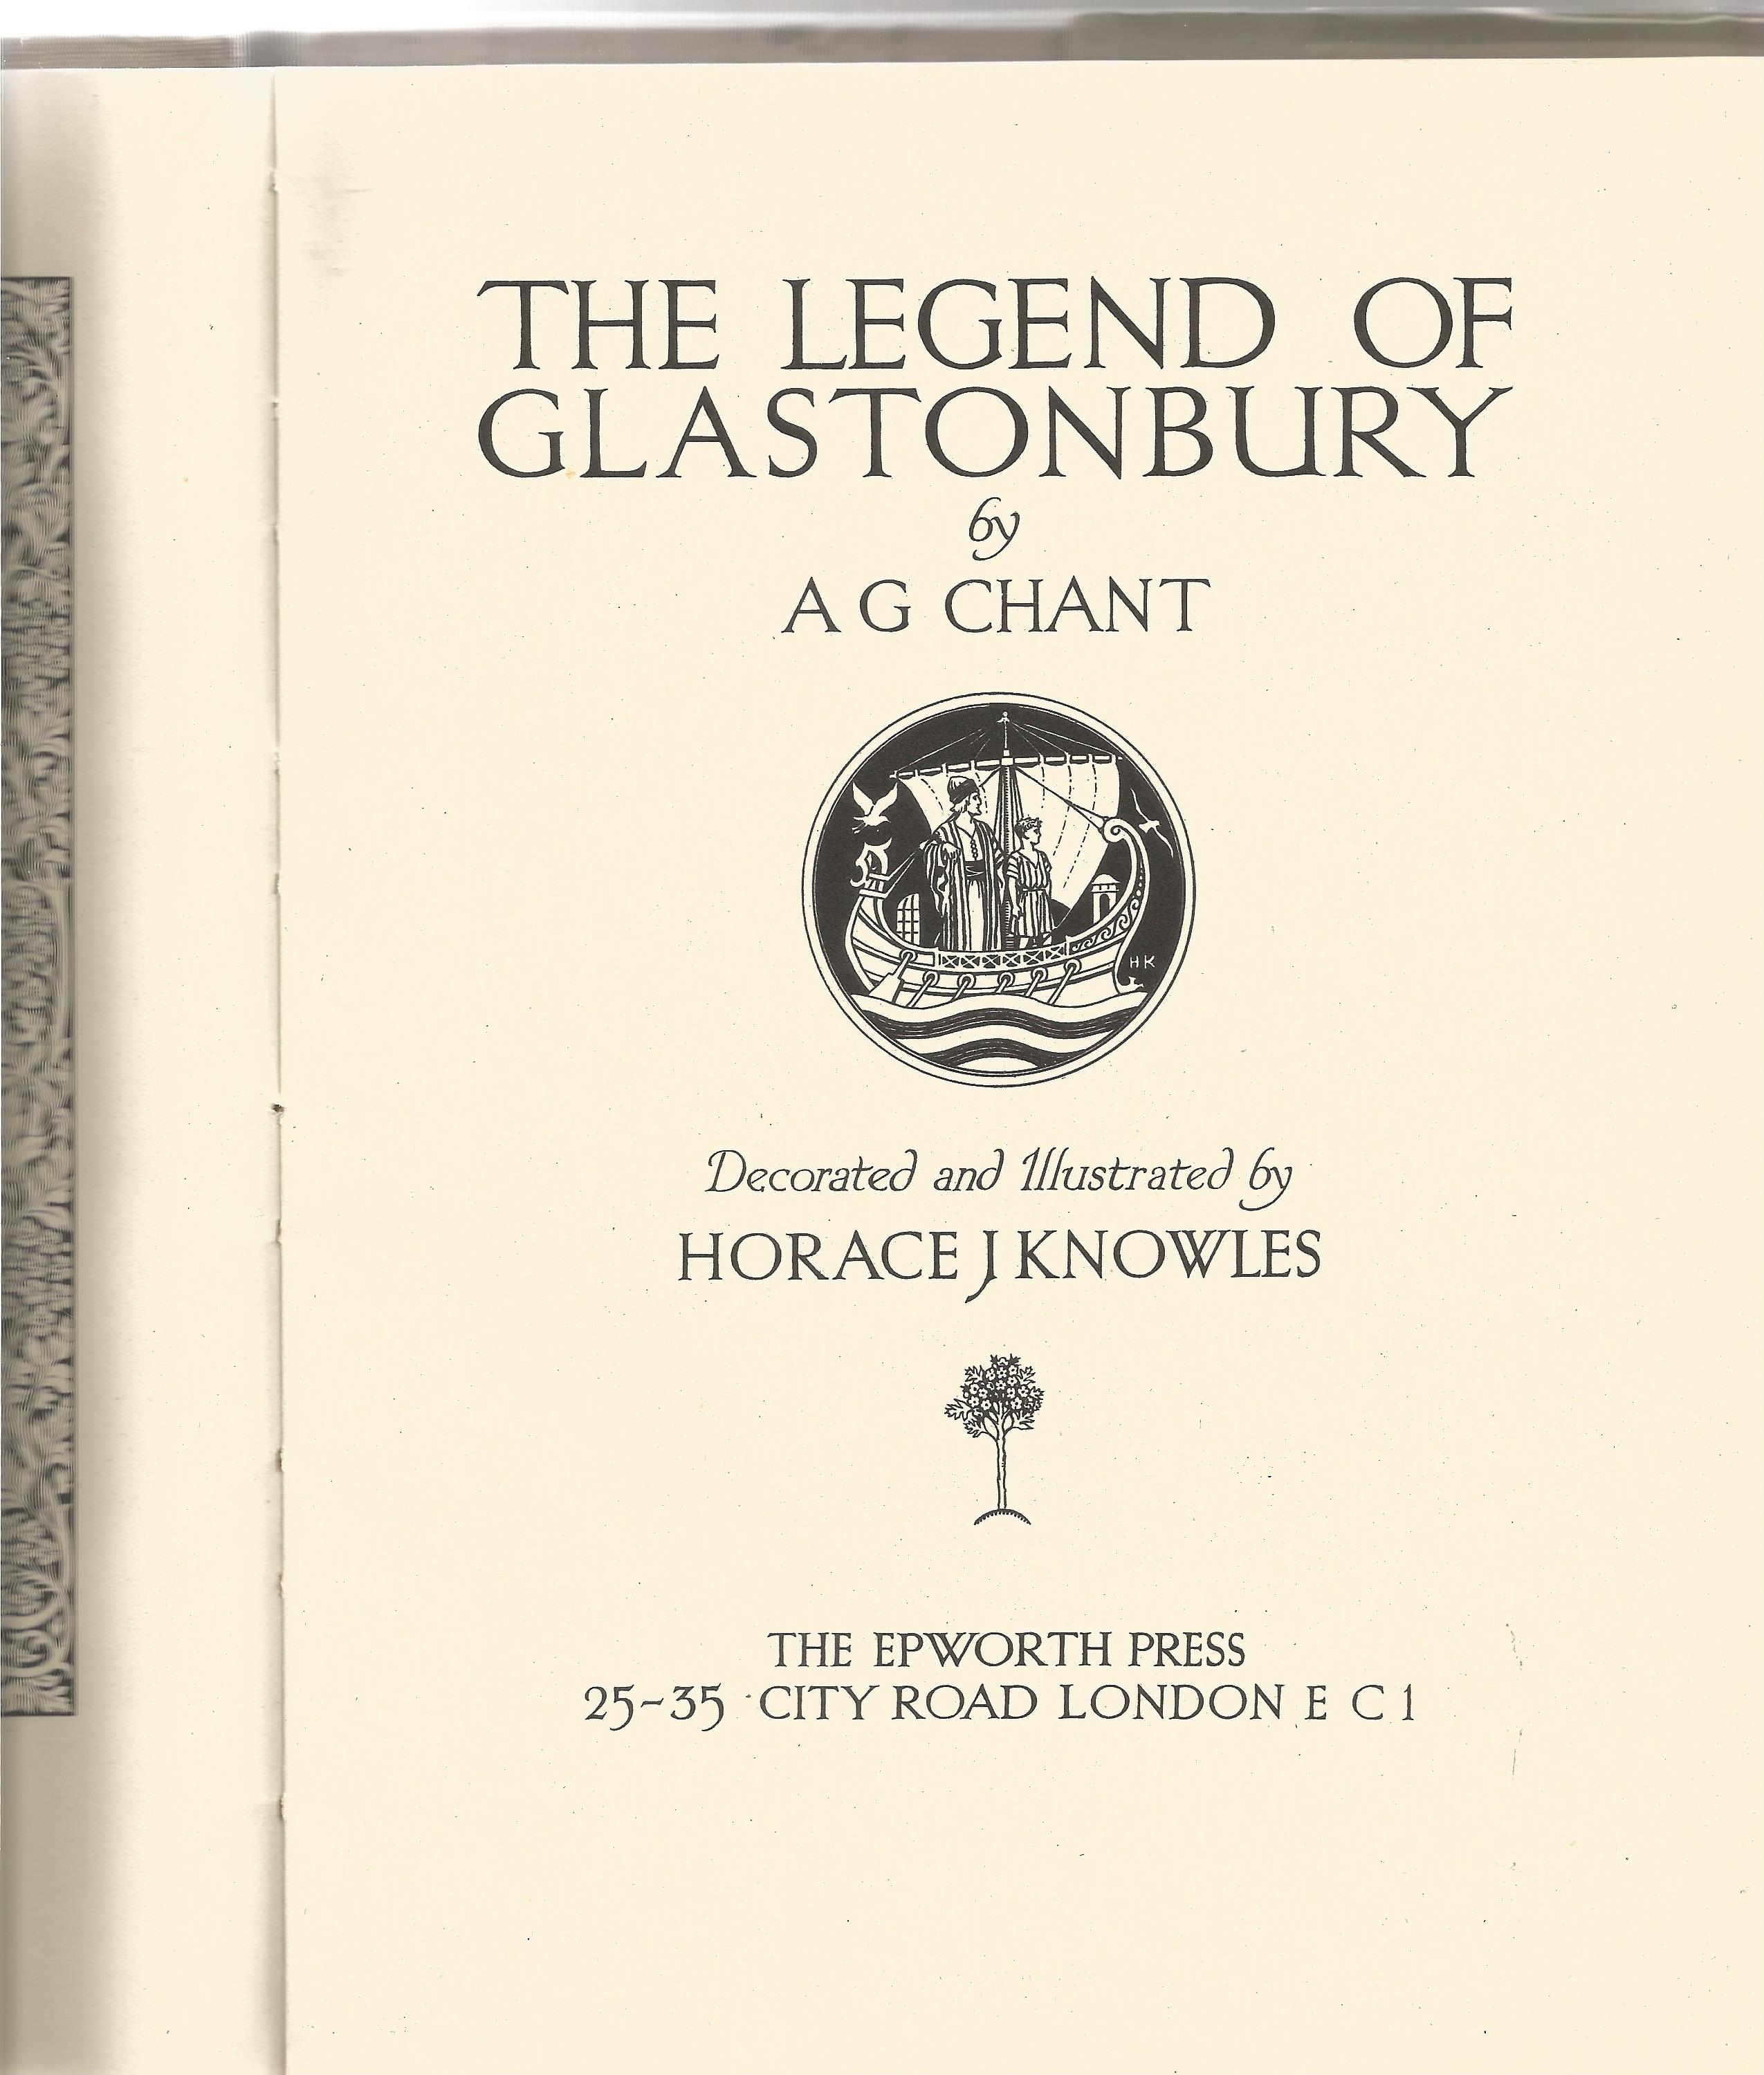 A G Chant. The Legend of Glastonbury. A first Edition hardback book. Signed by A G Chant on Foreword - Image 2 of 4